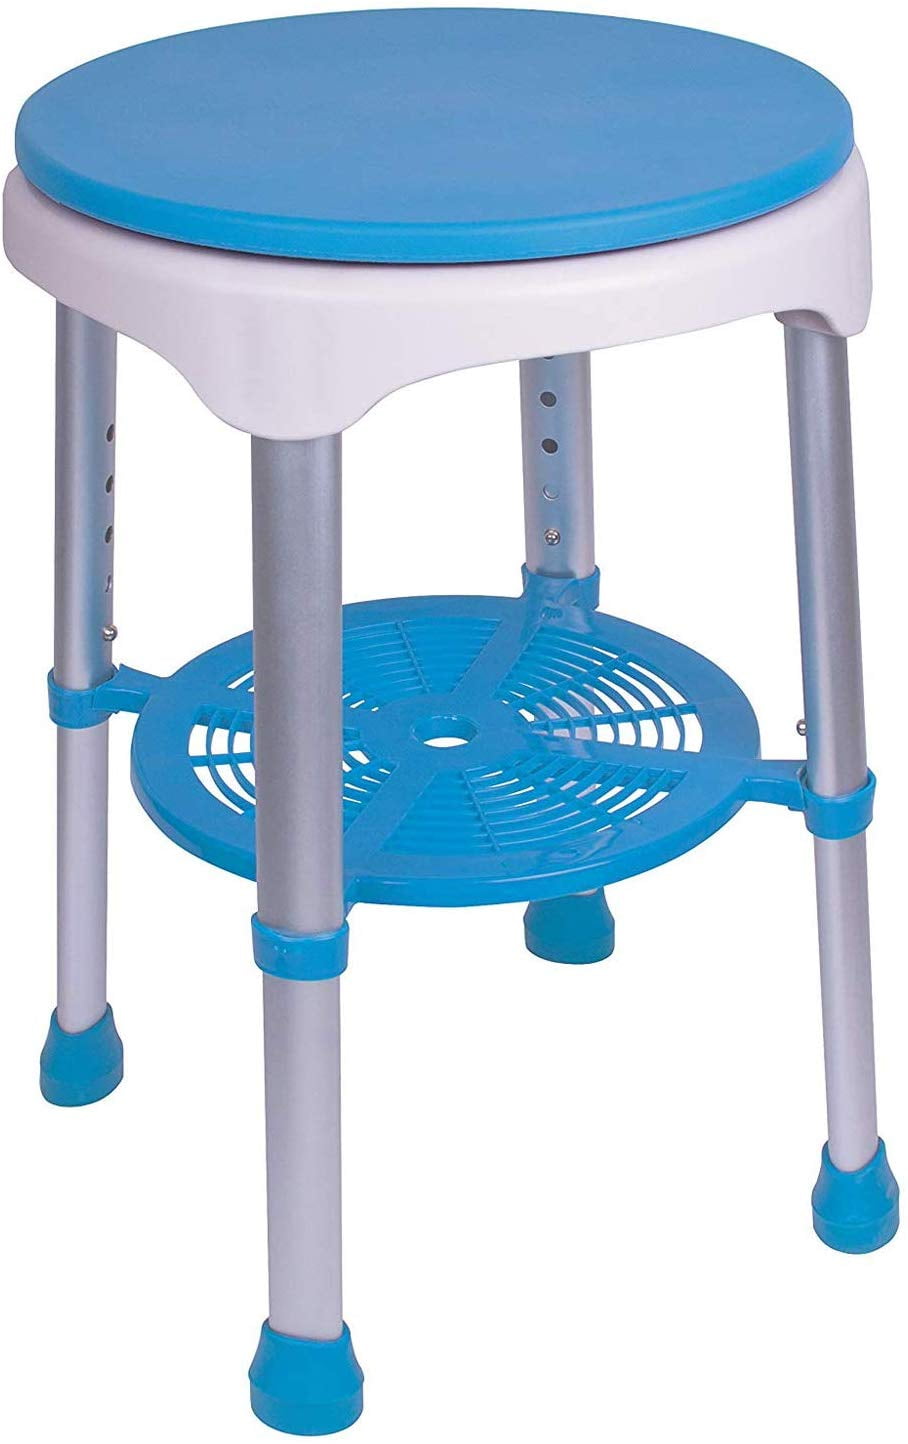 Carex Compact Round Shower Stool Shower Stool 